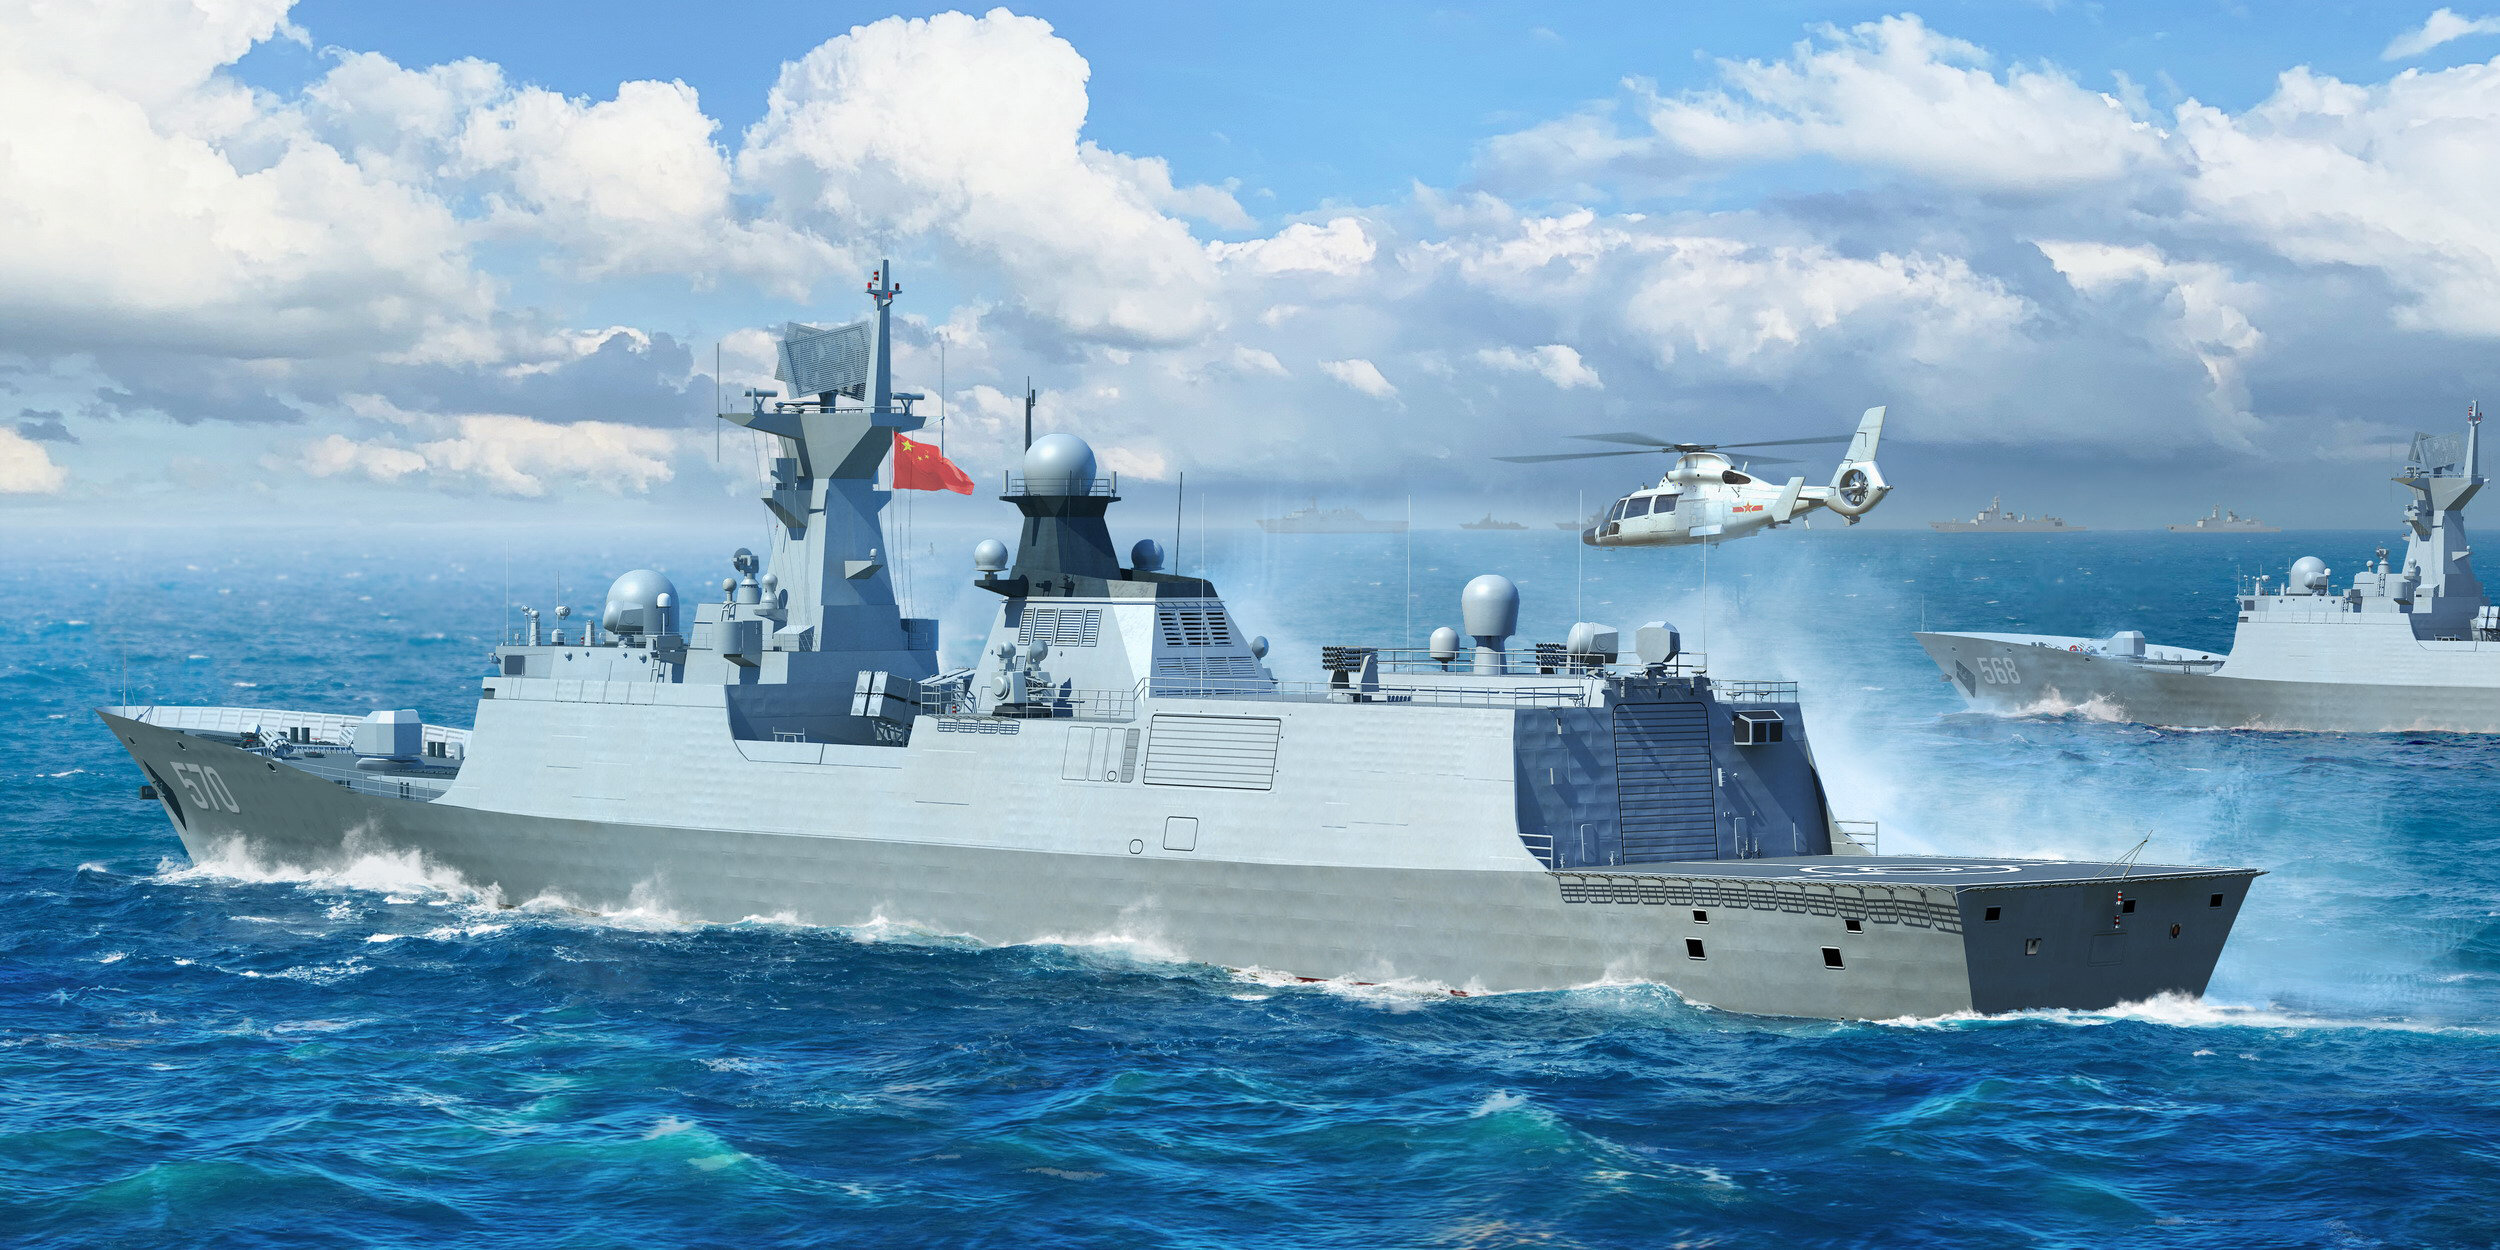 General 2500x1250 water clouds sky aircraft military vehicle waves sea warship Type 054A People's Liberation Army Navy